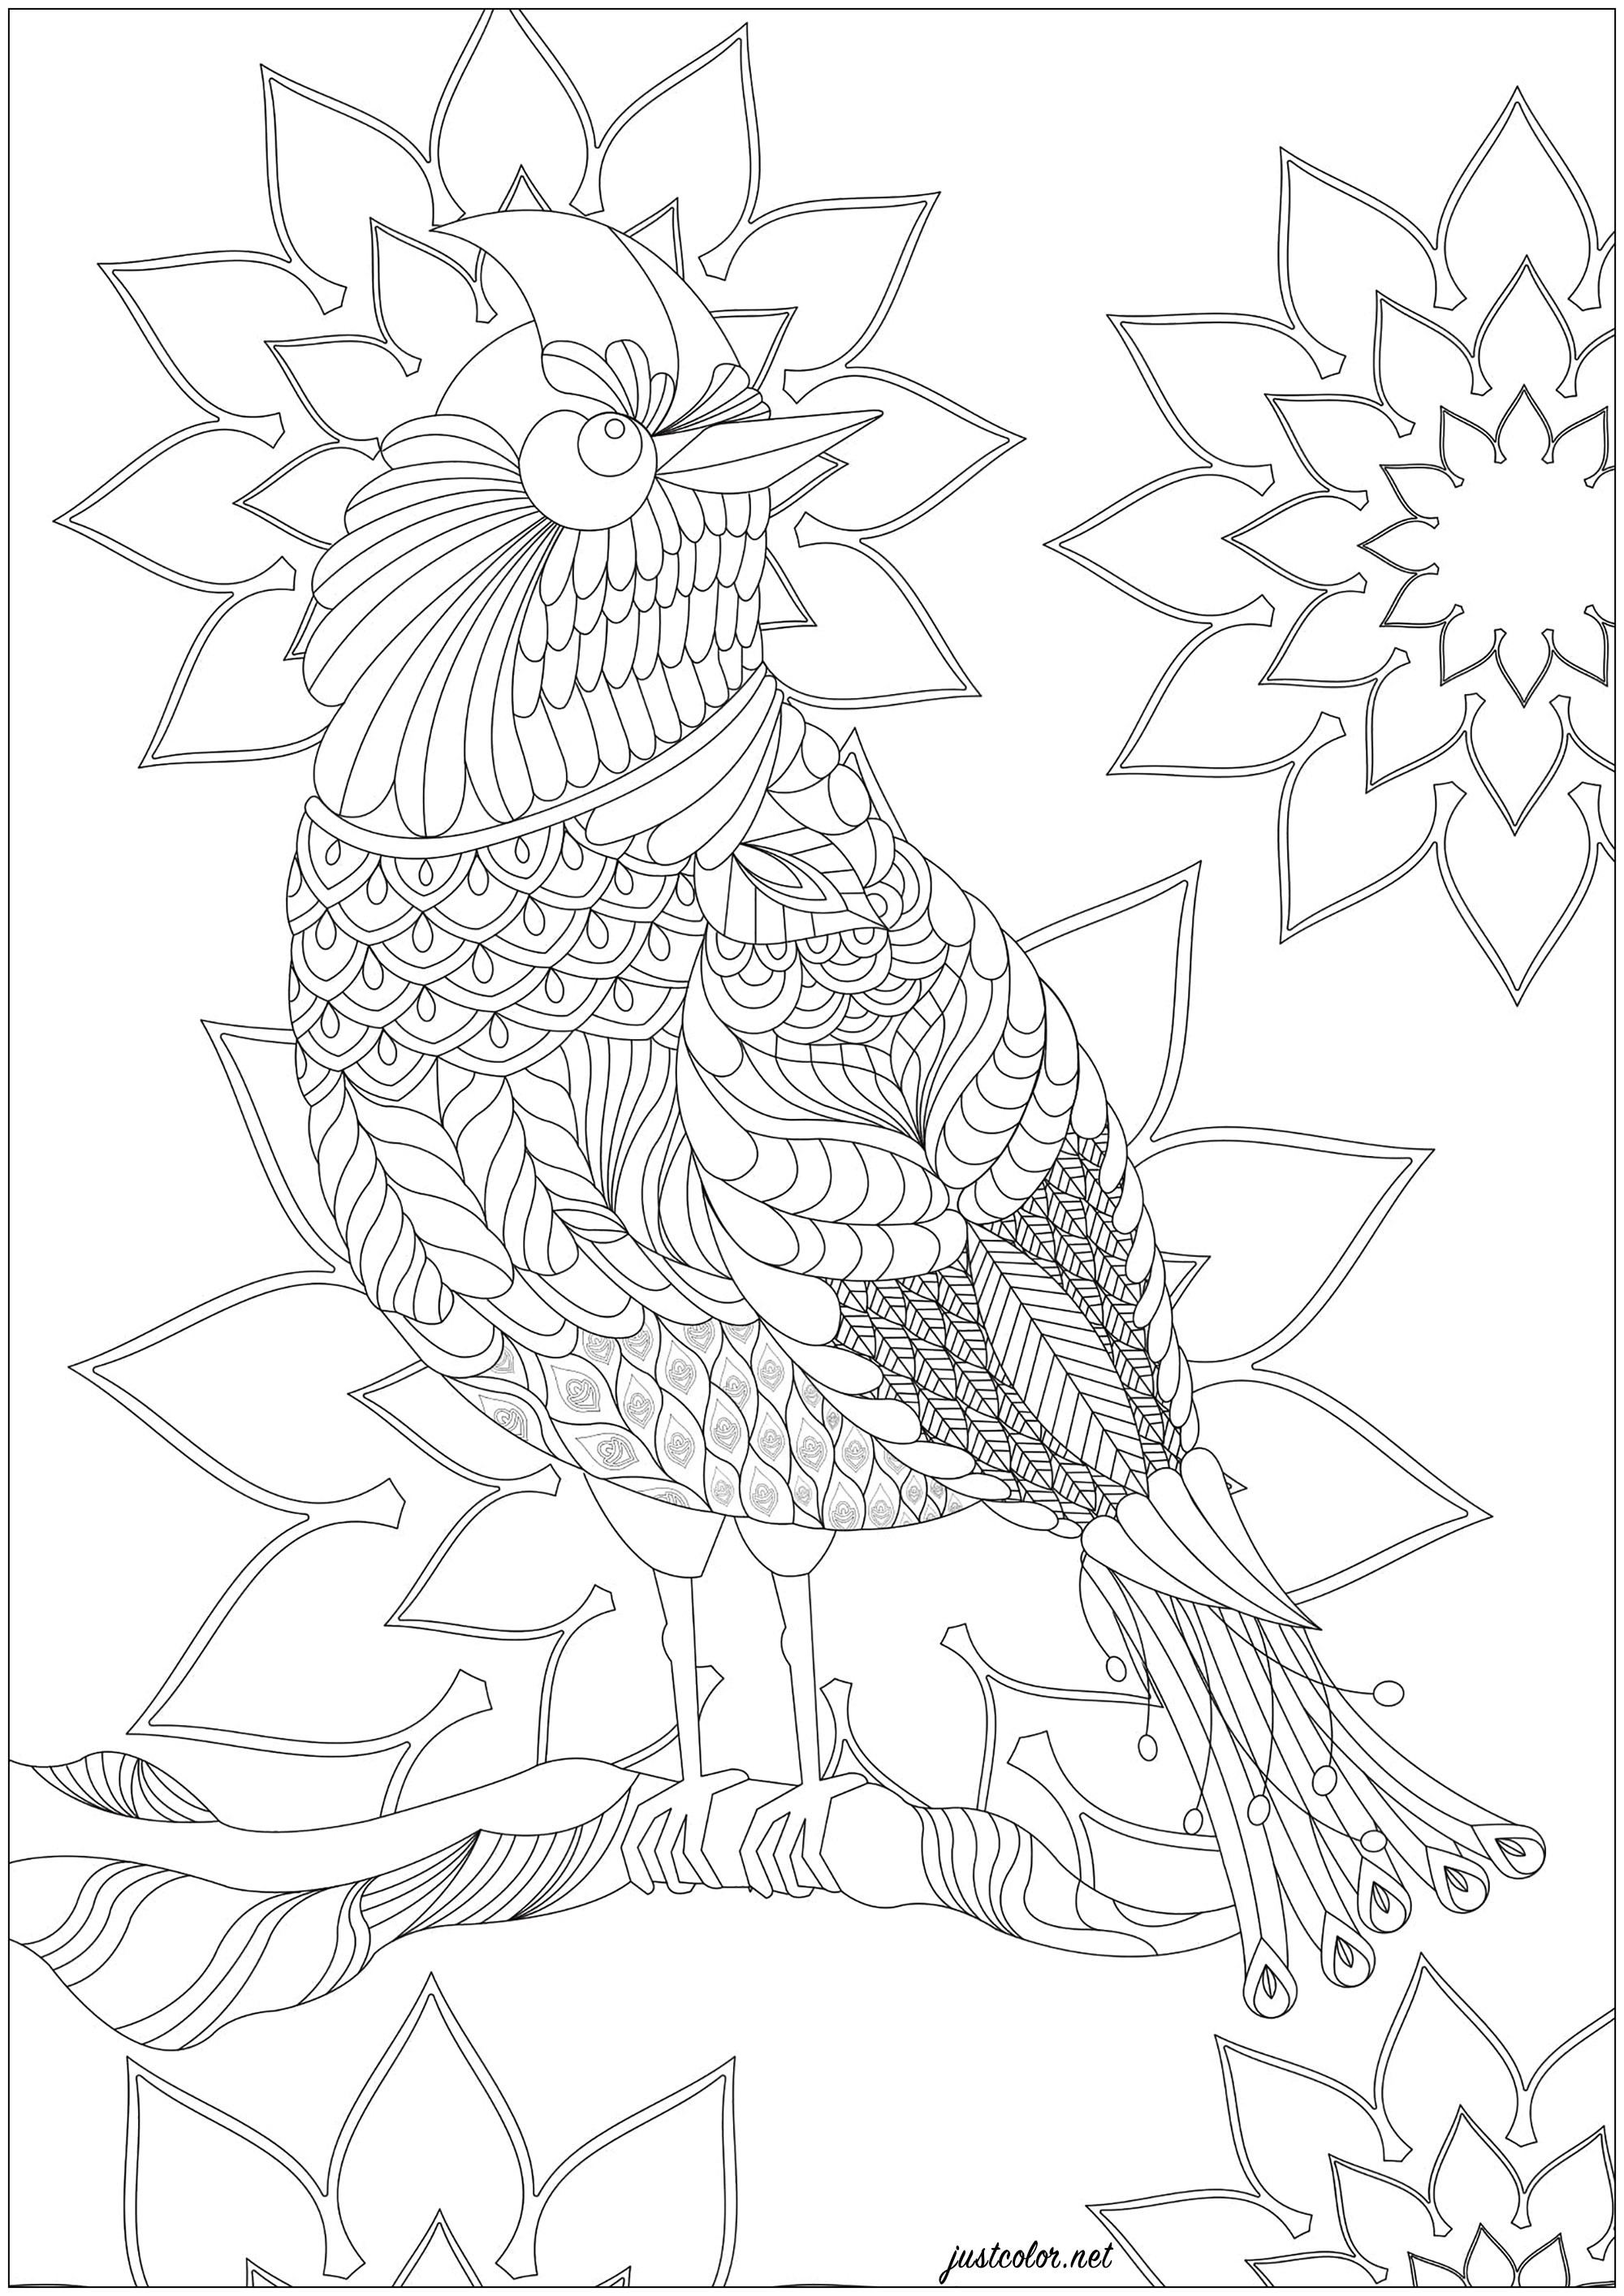 Imaginary bird, between the golden pheasant and the bird of paradise, with many patterns to color, Artist : Flora